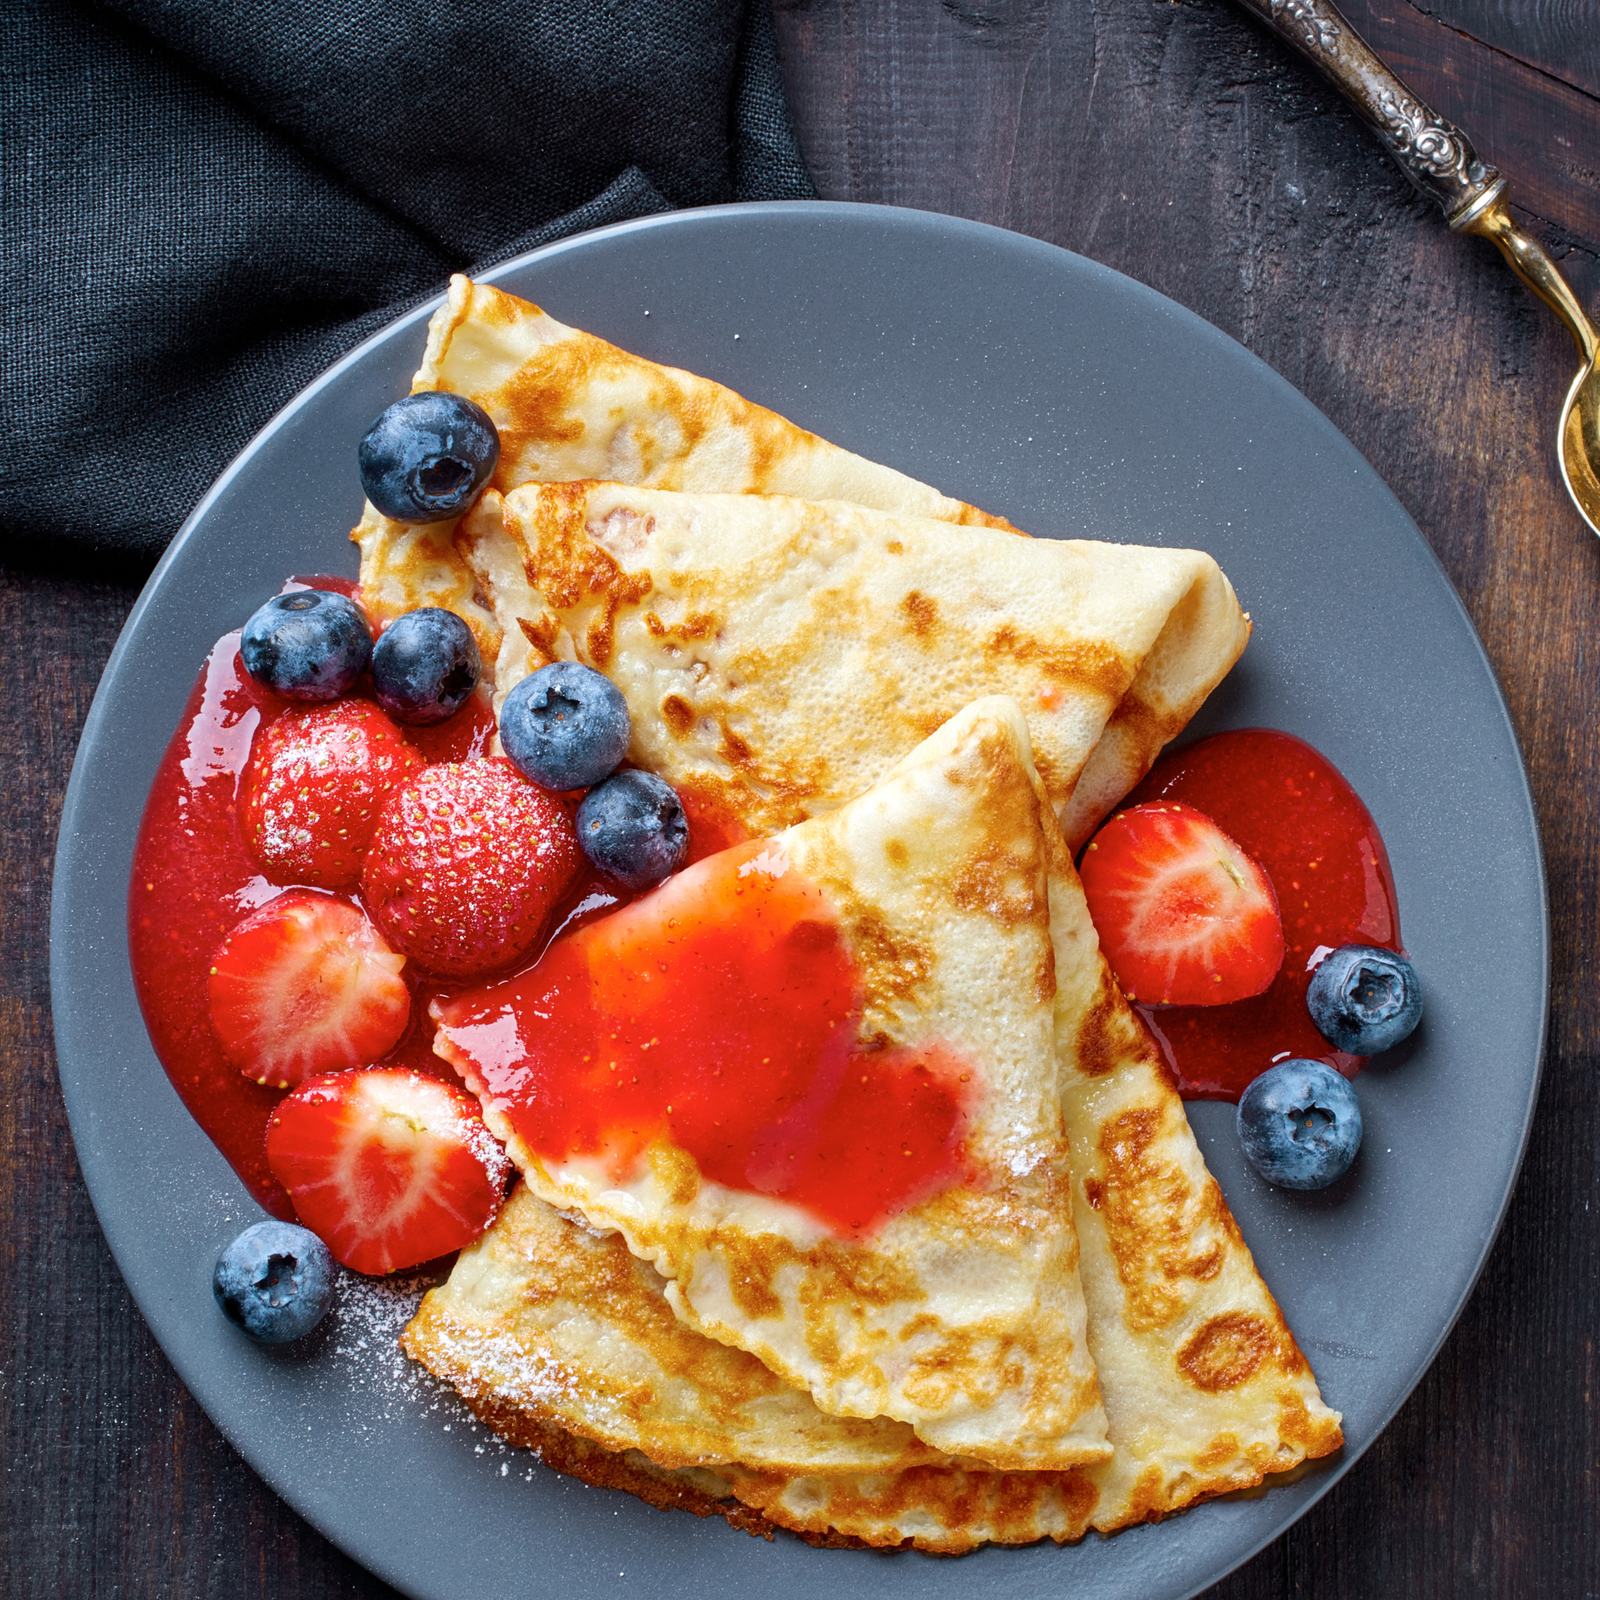 Crepes-Category